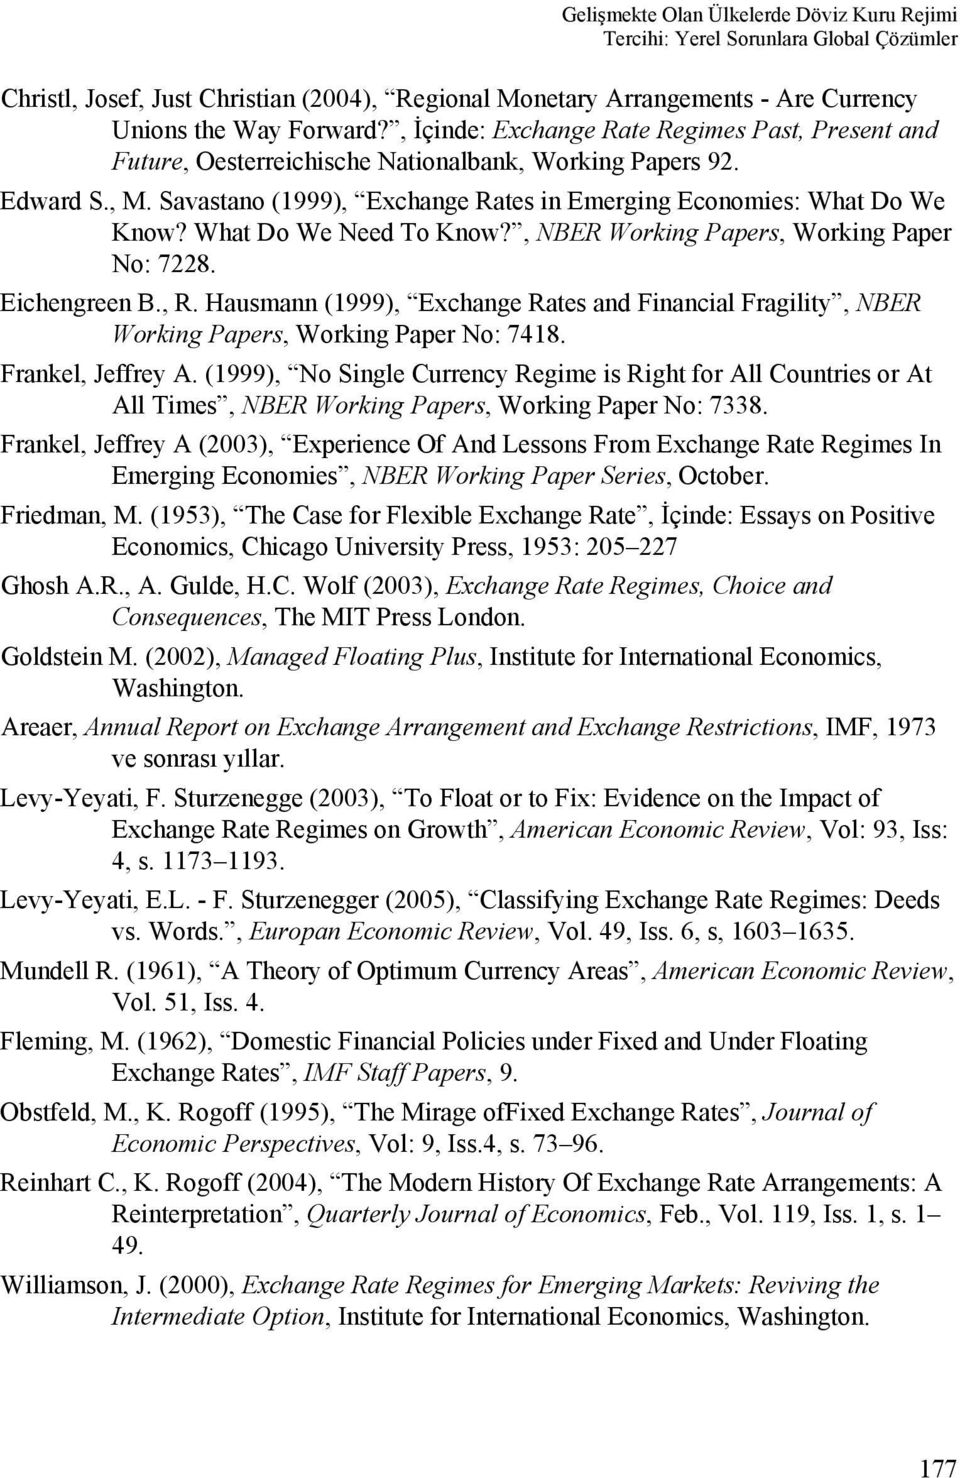 What Do We Need To Know?, NBER Working Papers, Working Paper No: 7228. Eichengreen B., R. Hausmann (1999), Exchange Rates and Financial Fragility, NBER Working Papers, Working Paper No: 7418.